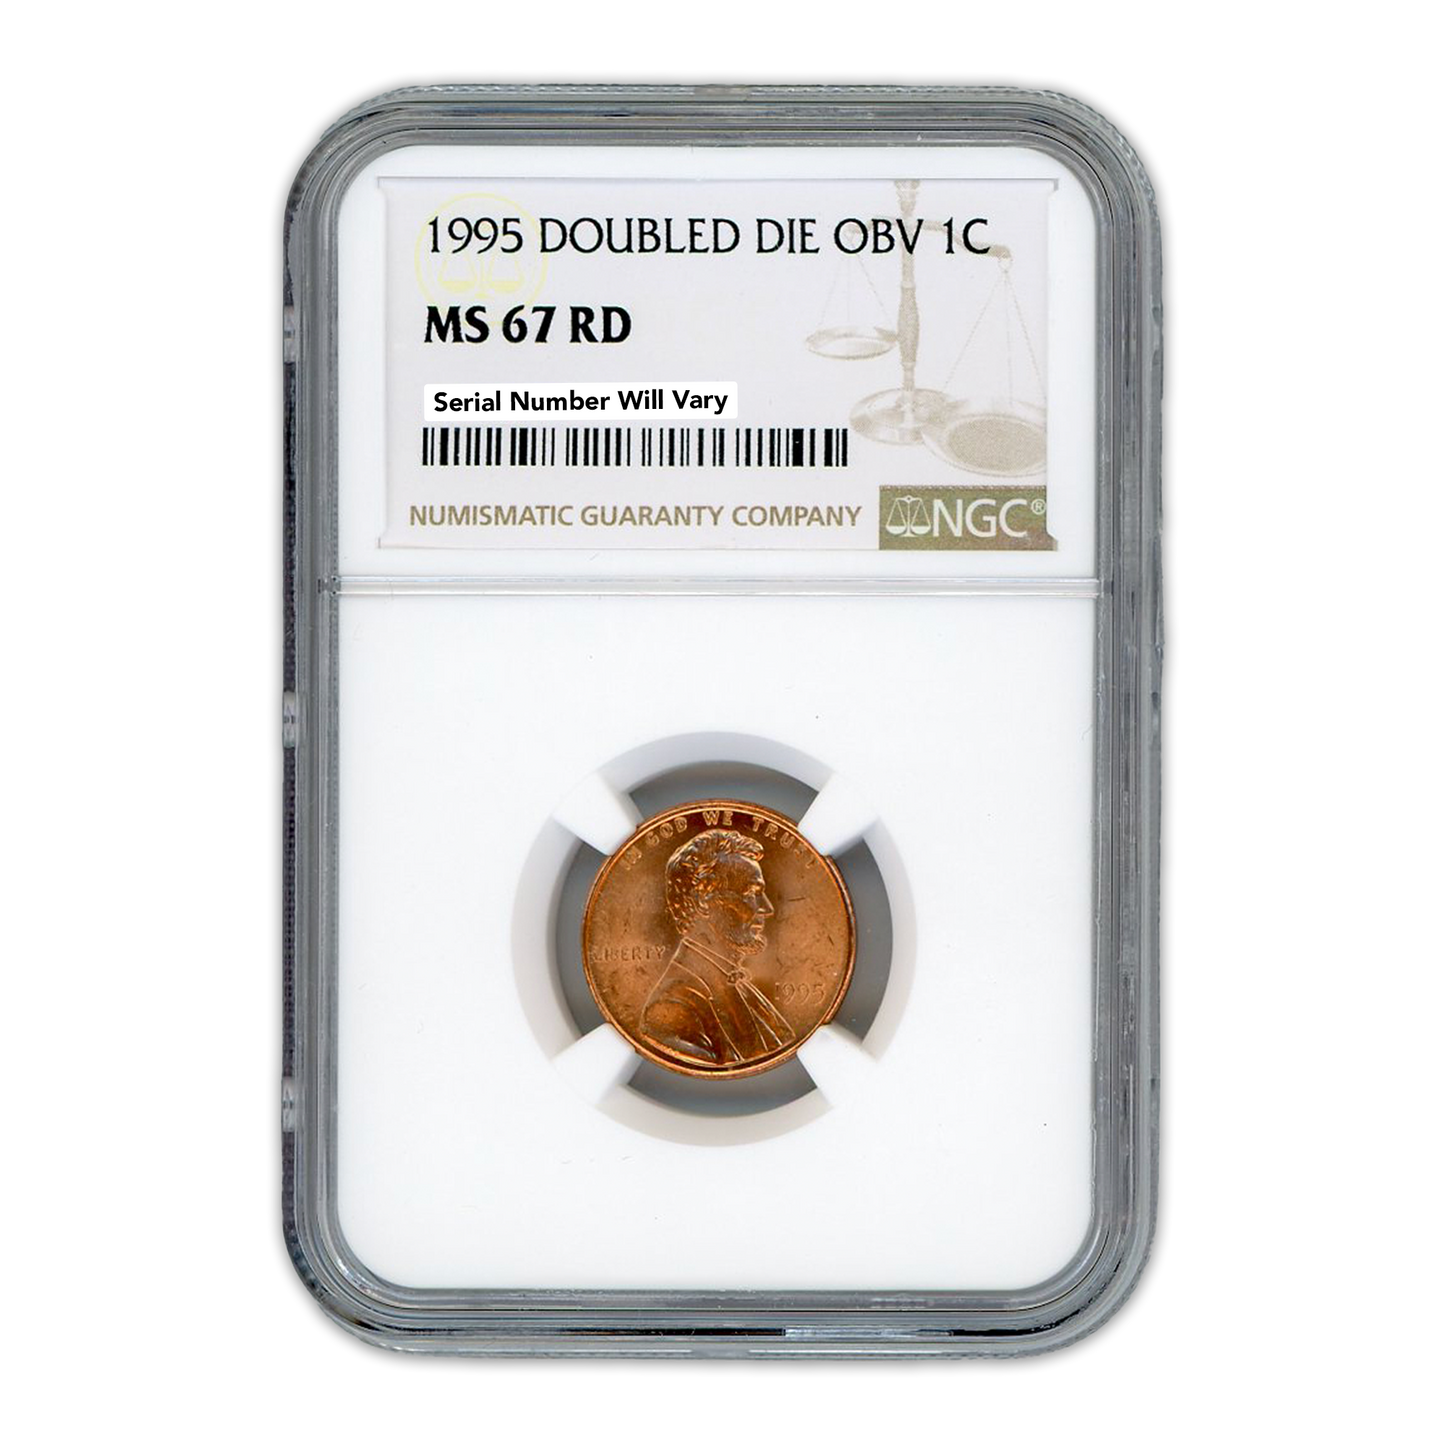 1995 Lincoln Cent - Doubled Die Obv. - MS67 RD